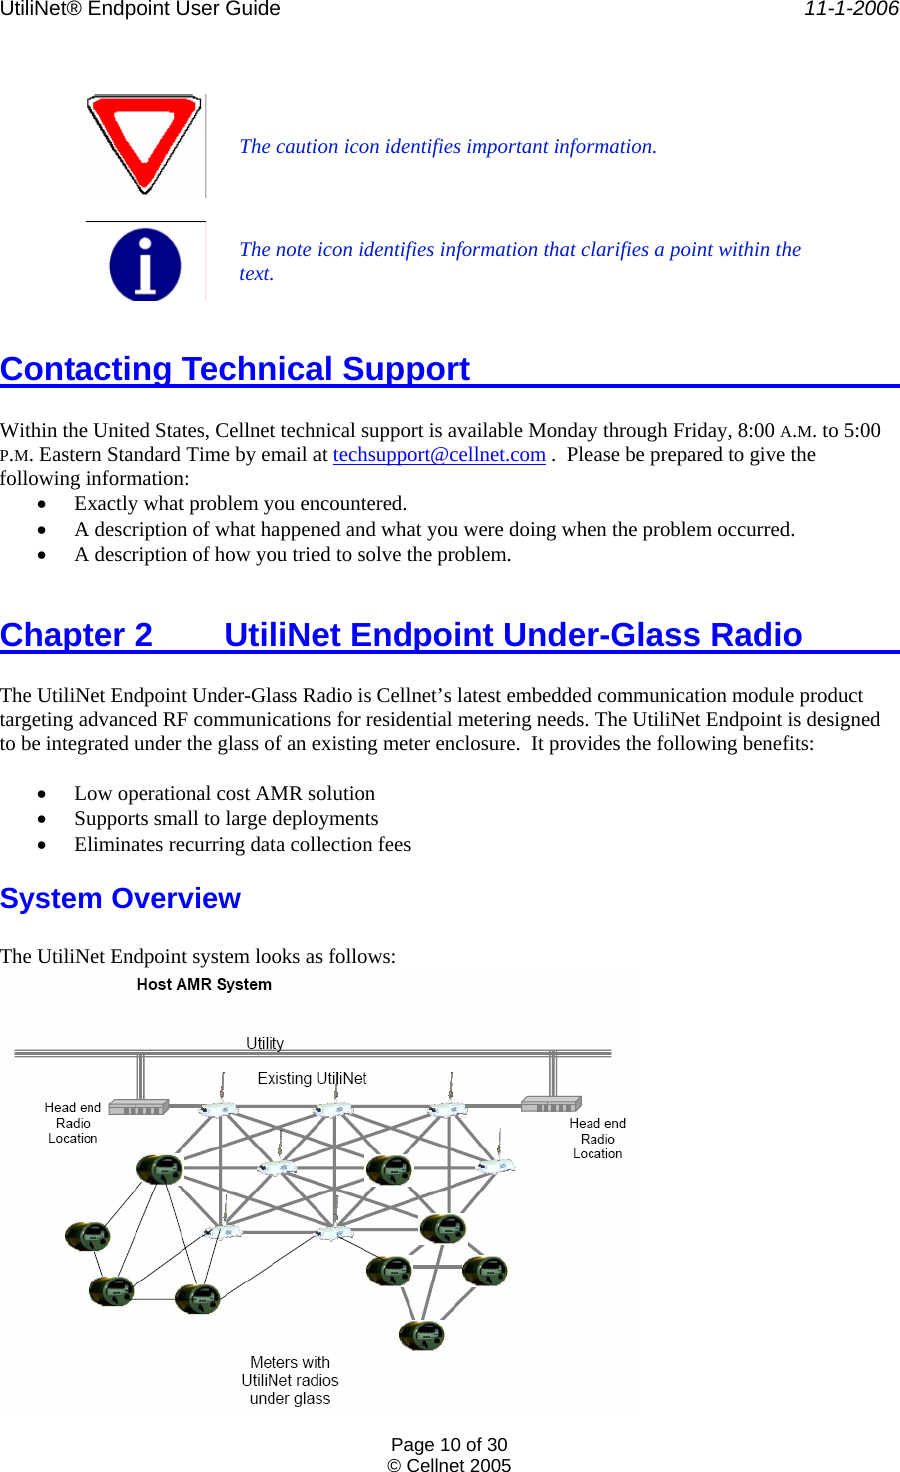 UtiliNet® Endpoint User Guide    11-1-2006 Page 10 of 30 © Cellnet 2005    The caution icon identifies important information.   The note icon identifies information that clarifies a point within the text.  Contacting Technical Support        Within the United States, Cellnet technical support is available Monday through Friday, 8:00 A.M. to 5:00 P.M. Eastern Standard Time by email at techsupport@cellnet.com .  Please be prepared to give the following information: • Exactly what problem you encountered. • A description of what happened and what you were doing when the problem occurred. • A description of how you tried to solve the problem.  Chapter 2  UtiliNet Endpoint Under-Glass Radio      The UtiliNet Endpoint Under-Glass Radio is Cellnet’s latest embedded communication module product targeting advanced RF communications for residential metering needs. The UtiliNet Endpoint is designed to be integrated under the glass of an existing meter enclosure.  It provides the following benefits:  • Low operational cost AMR solution • Supports small to large deployments • Eliminates recurring data collection fees System Overview  The UtiliNet Endpoint system looks as follows:  